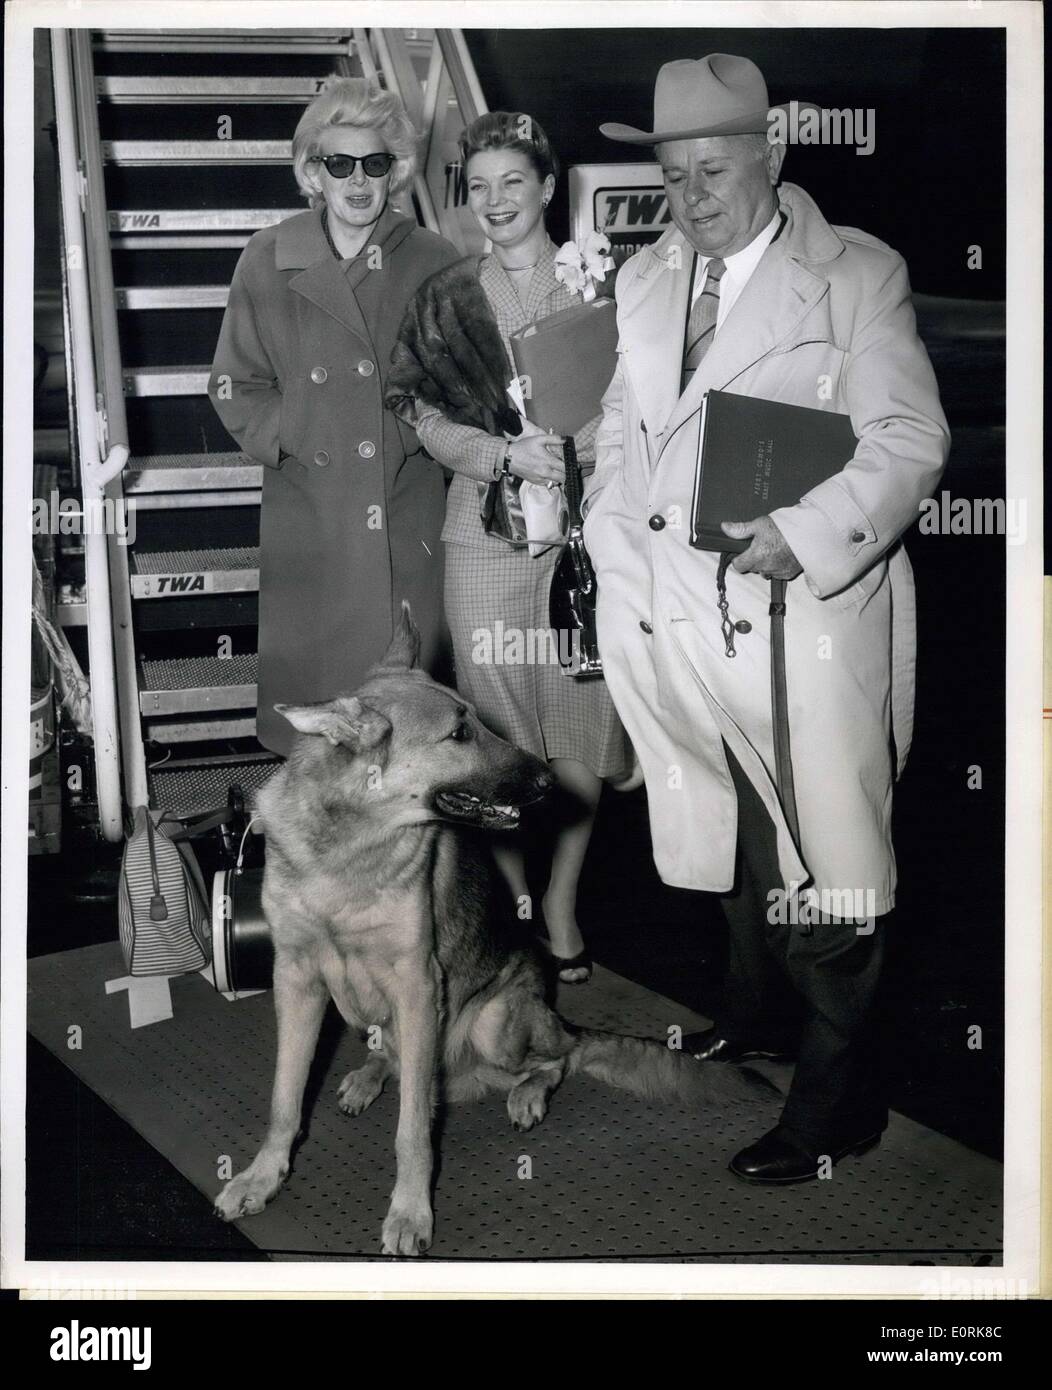 Oct. 22, 1959 - Song Bird Rosemary Clooney, Gail (TV's Annie akley) And Frank Barnes, Trainer Of The Popular K-9 TV Star Bin Tin Tin (Foreground) Pose For Photographer Prior To Boarding A TWA Jetliner To Los Angeles. All Made Guest Appearances Last Evening On The Perry Coeo Show. Stock Photo